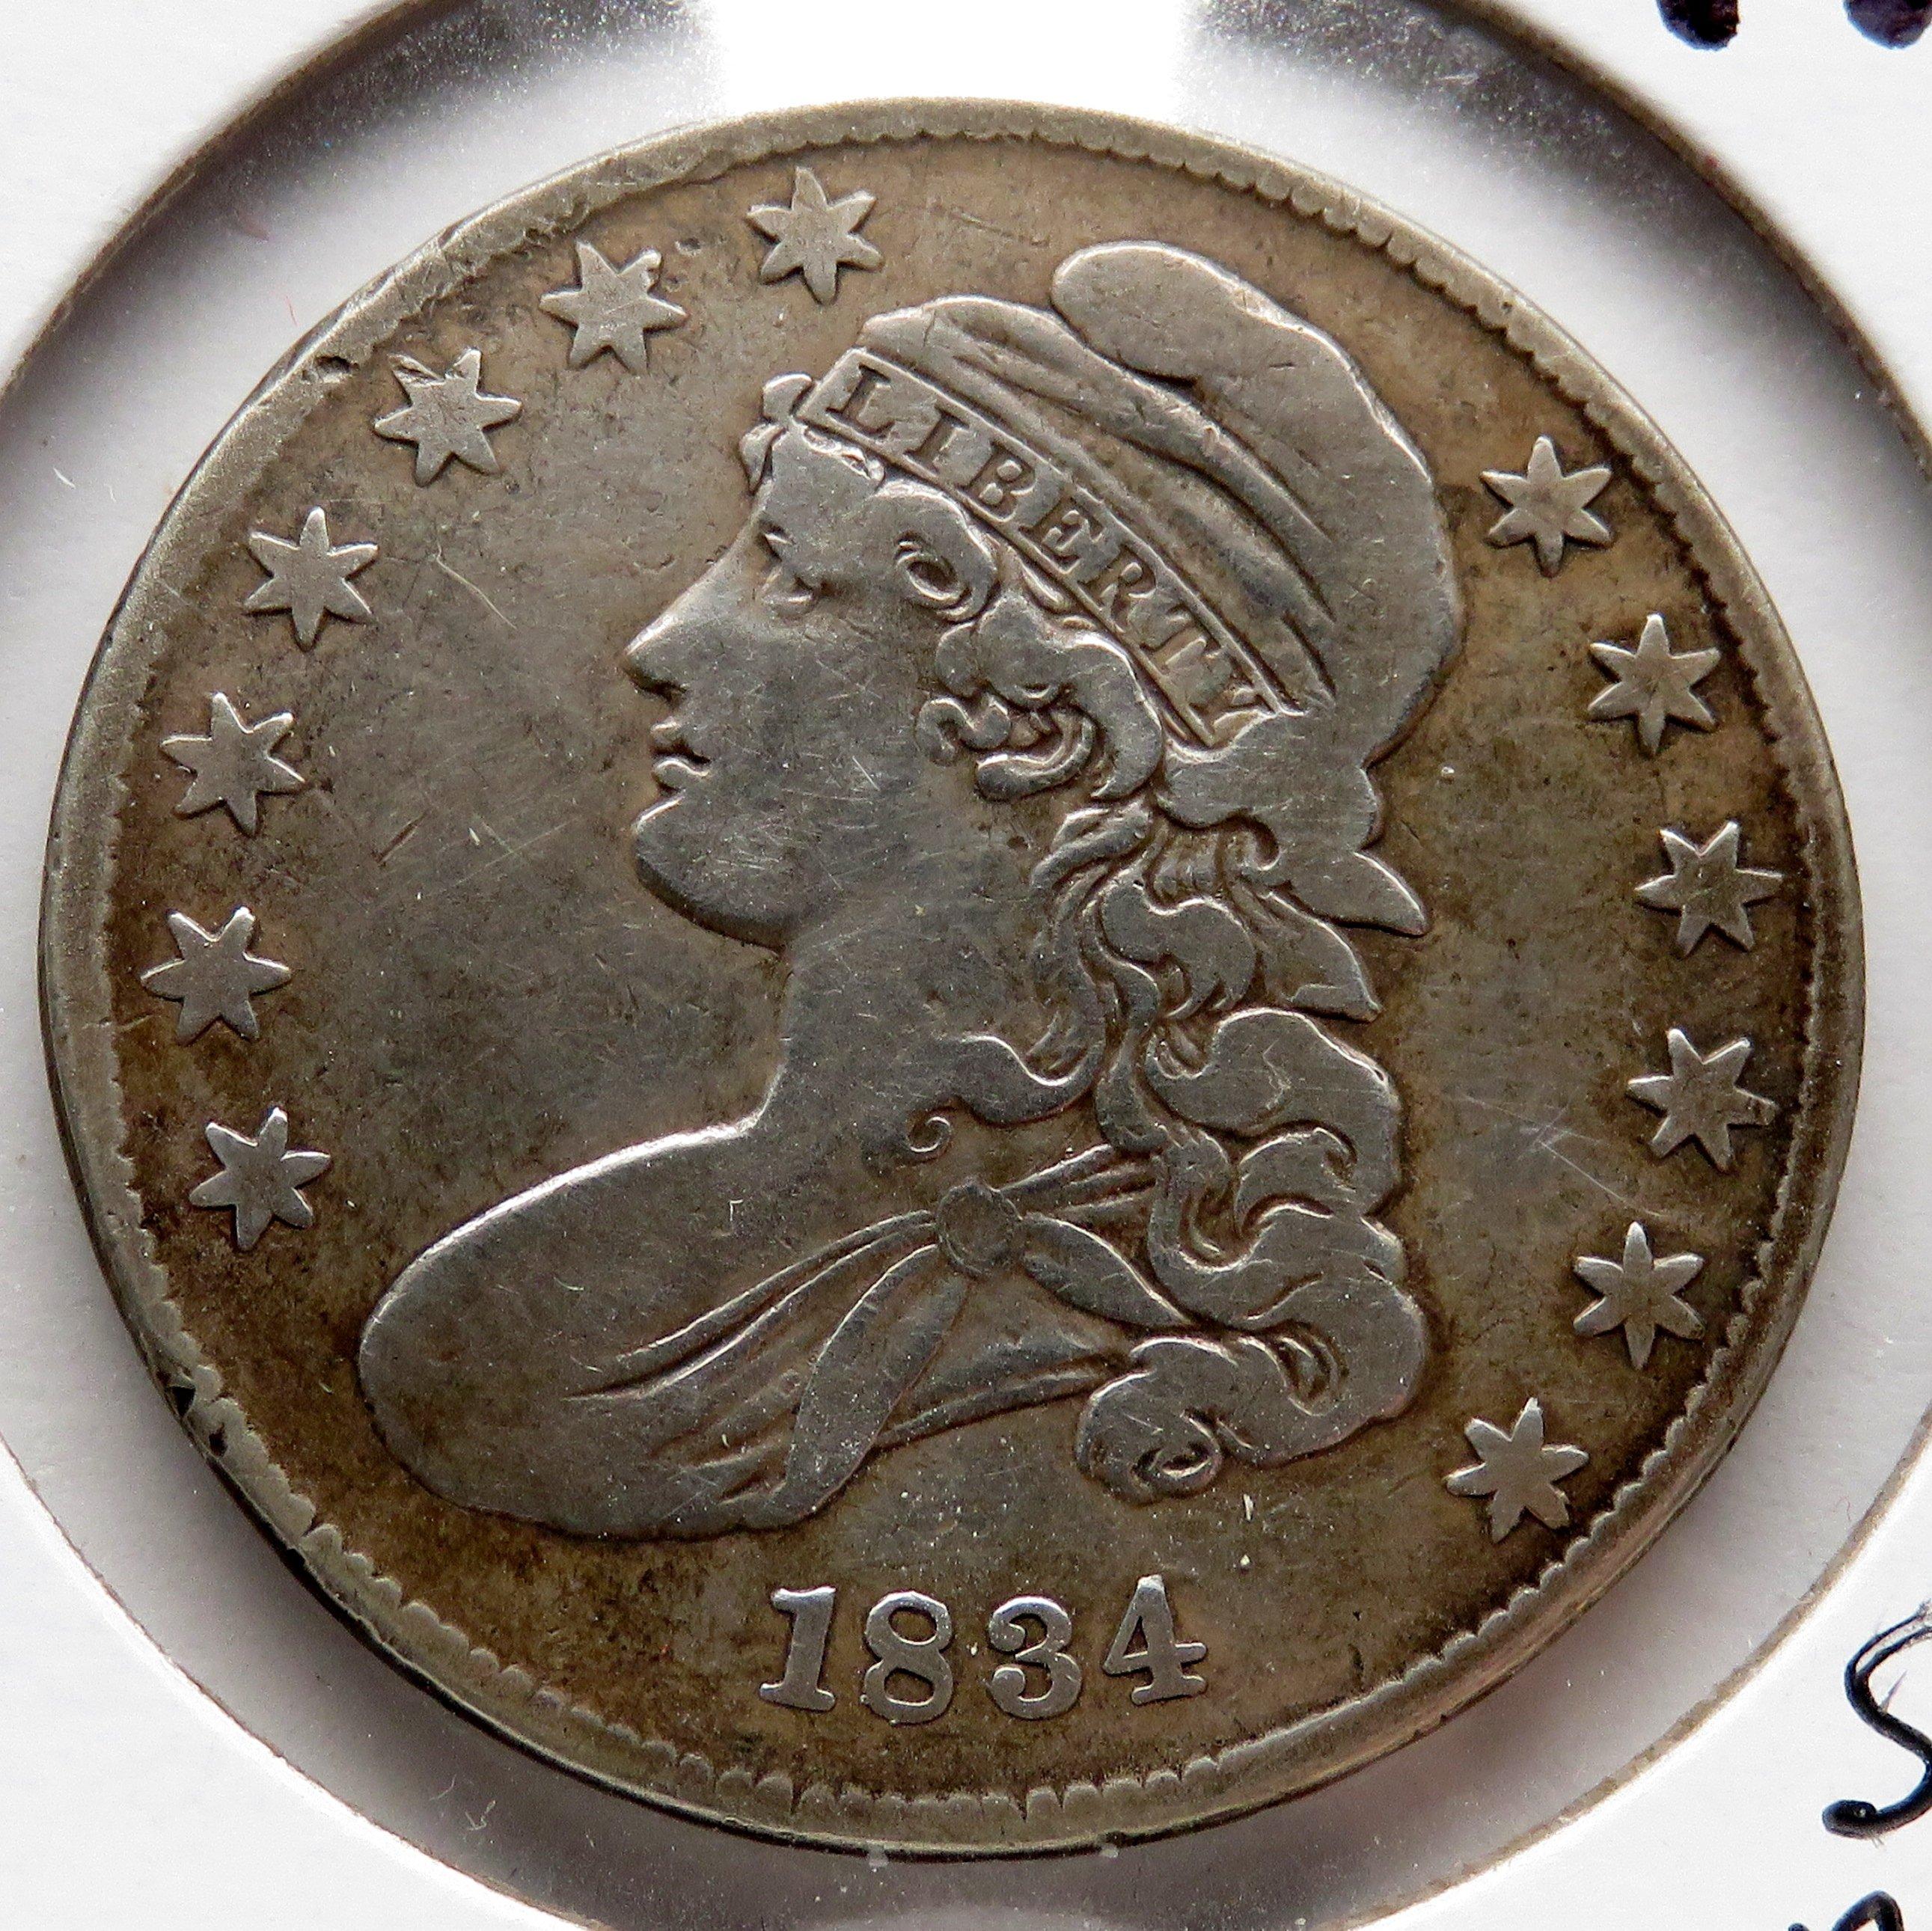 Half $ Capped Bust 1834 Fine (Small date stars & letters)